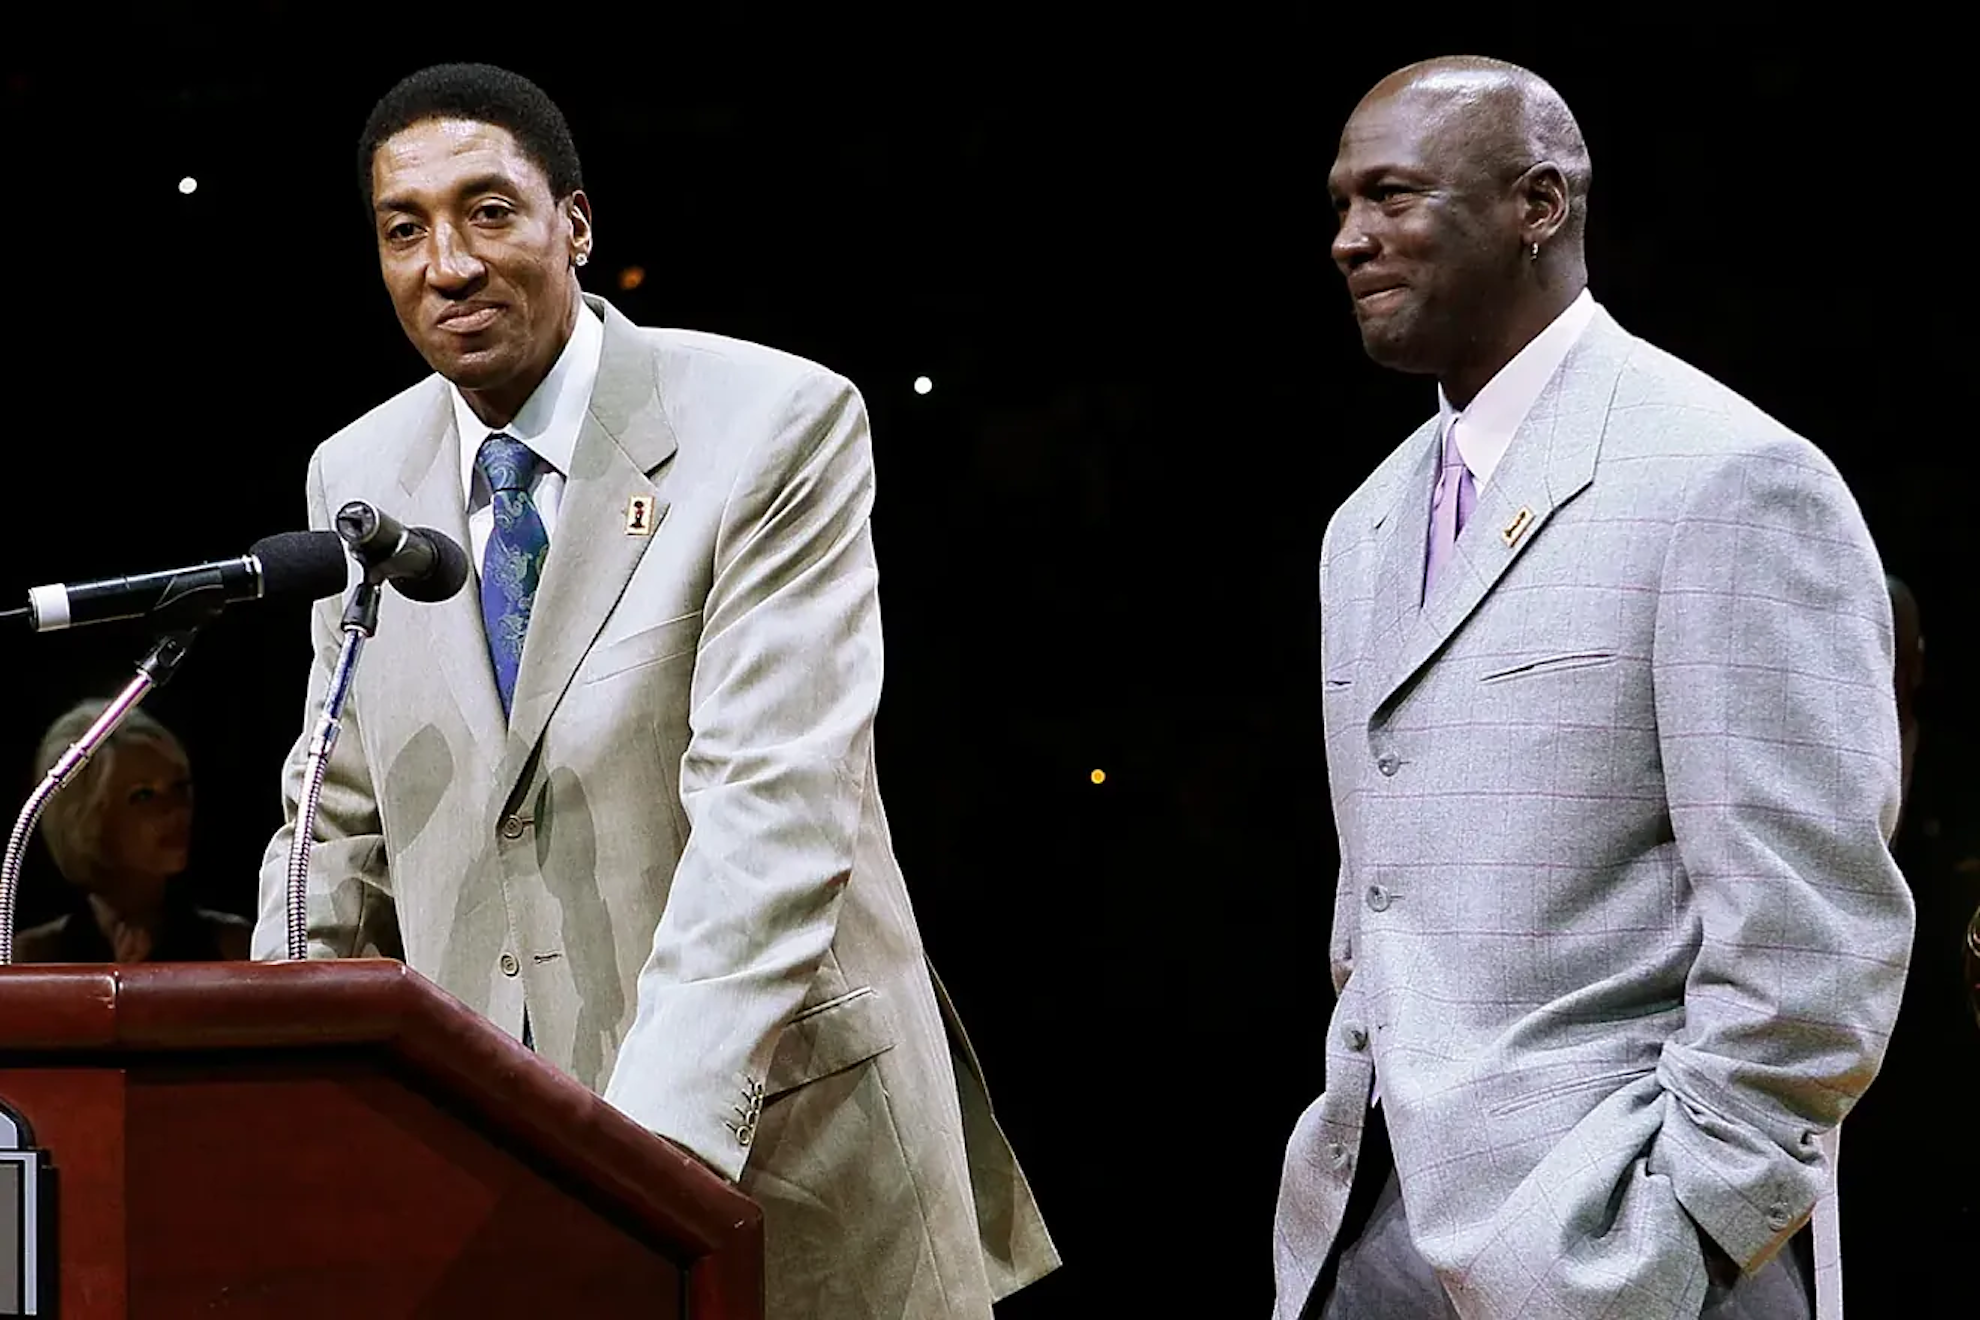 Stephen A. Smith sheds light on one of Scottie Pippen and Michael Jordans problems: He feels betrayed